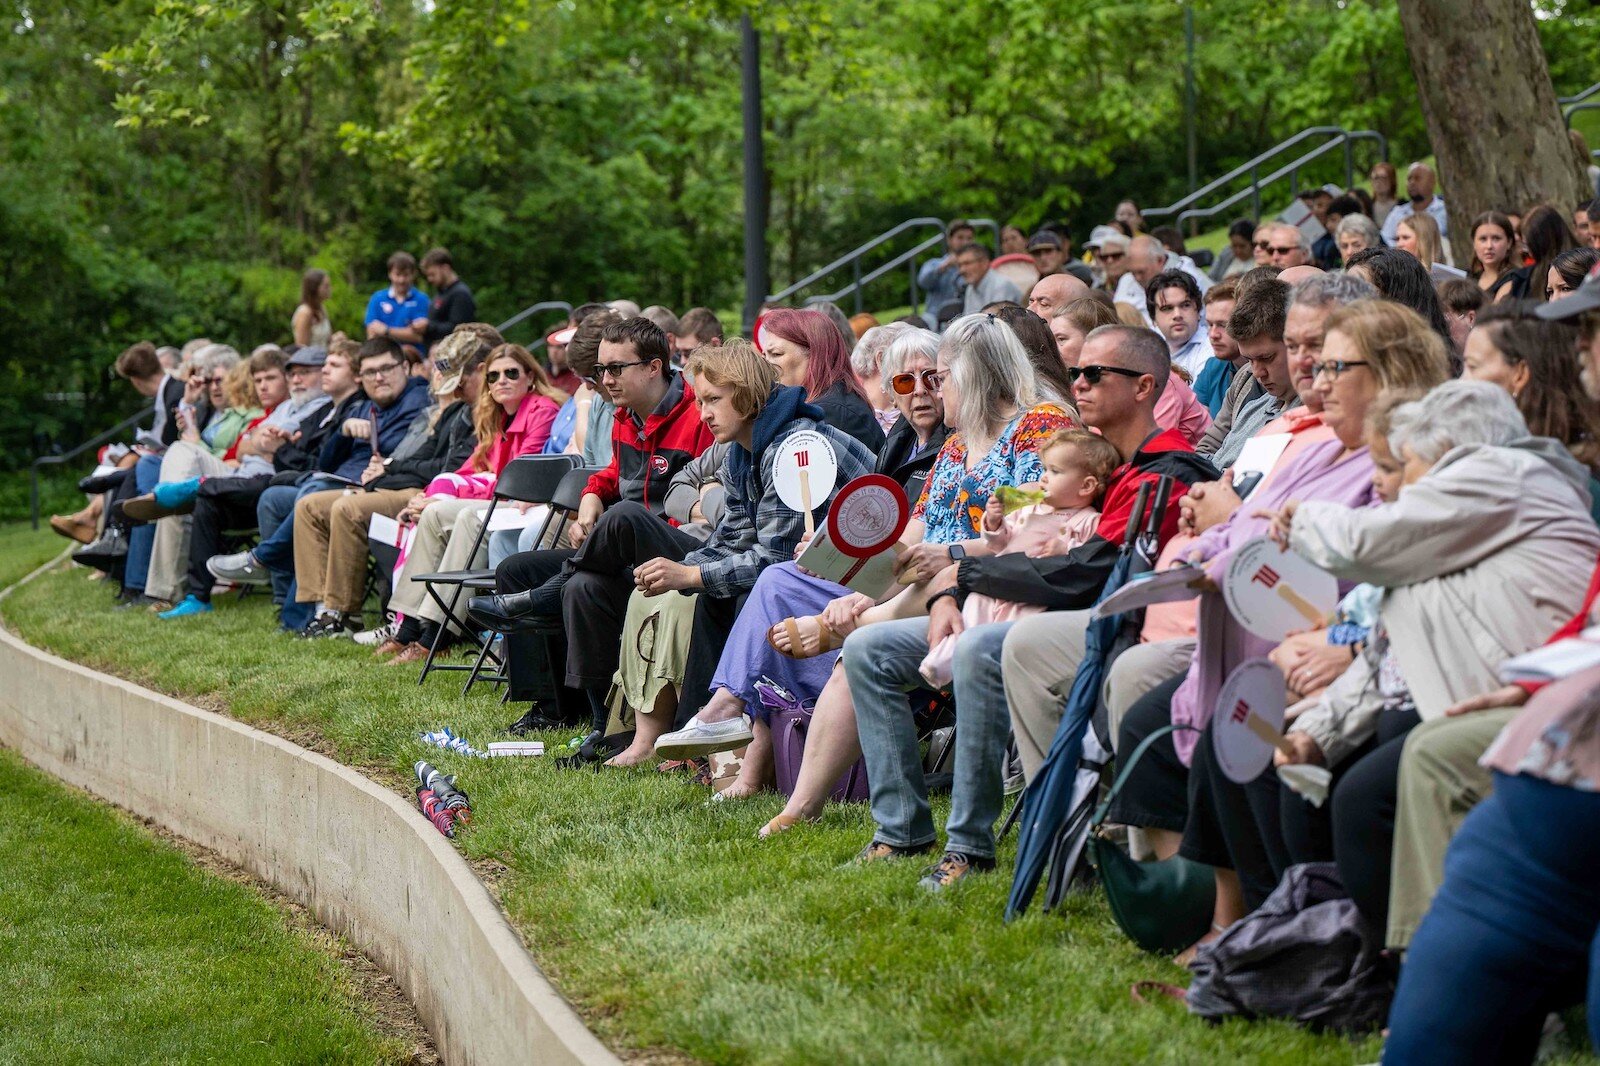 Wittenberg University celebrated its 2024 Commencement Exercises in the traditional picturesque outdoor setting on Saturday, May 11.